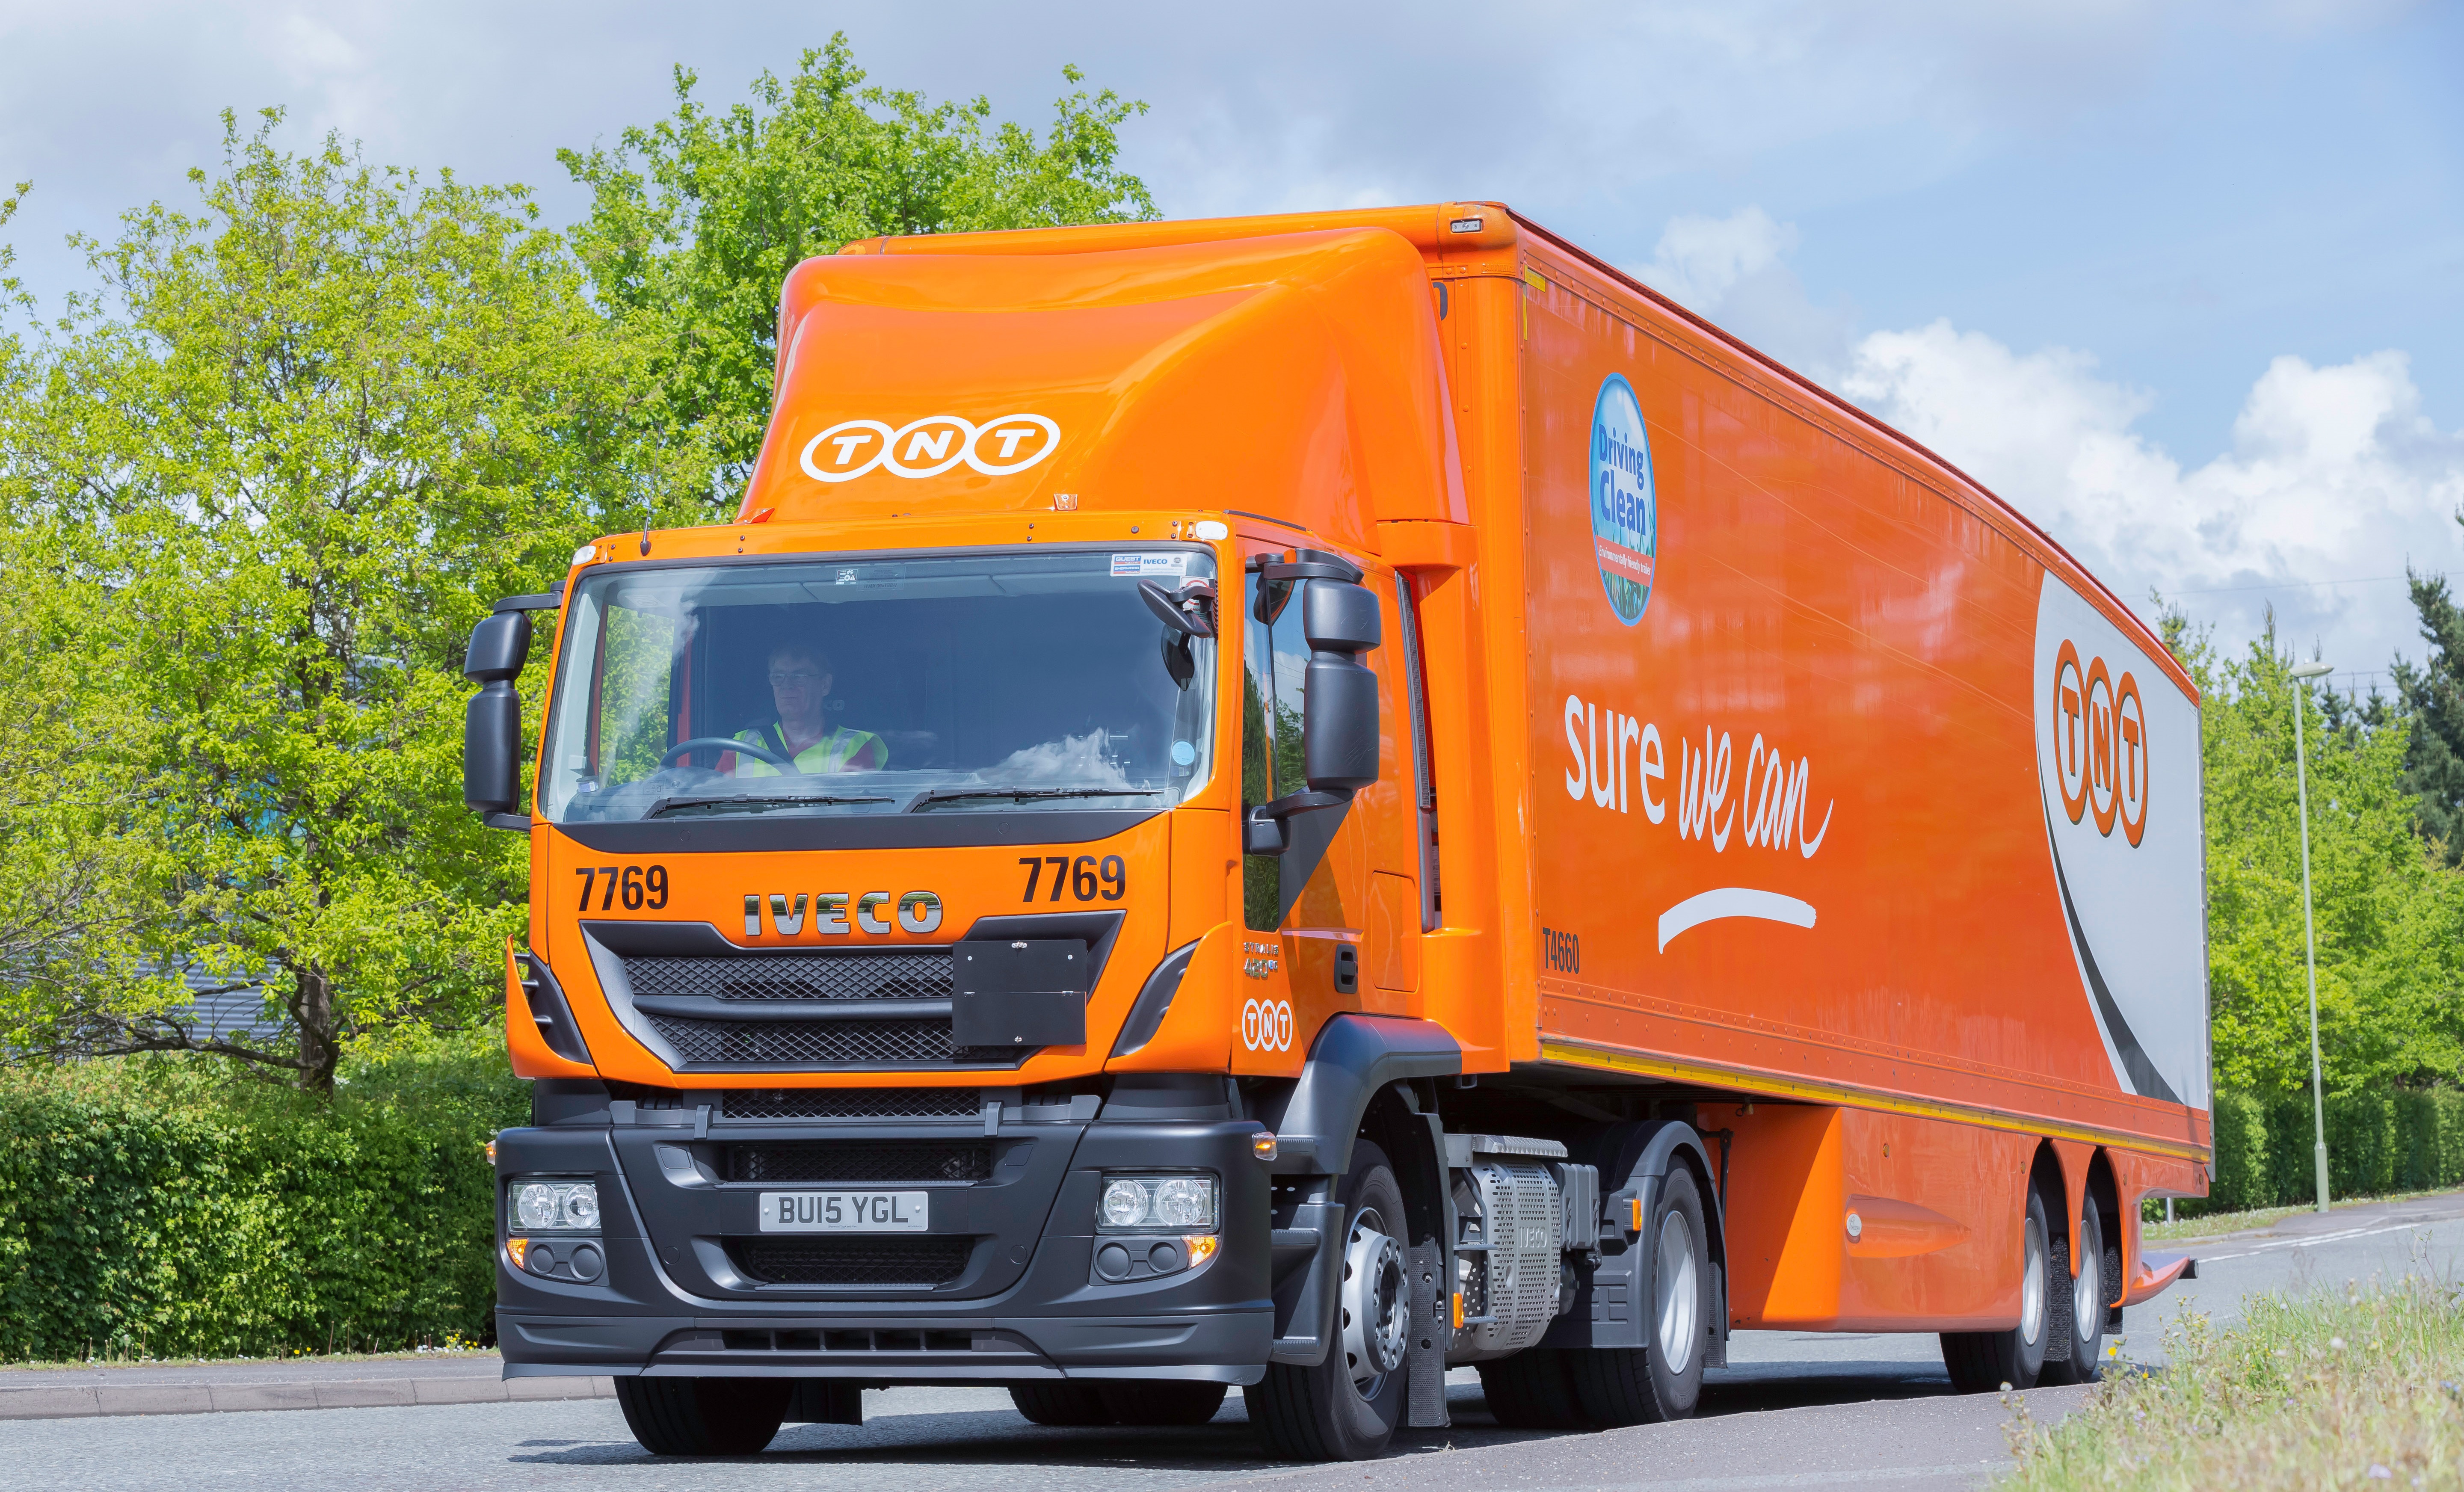 TNT Express Operations Disrupted | Courier & Parcels UK Haulier